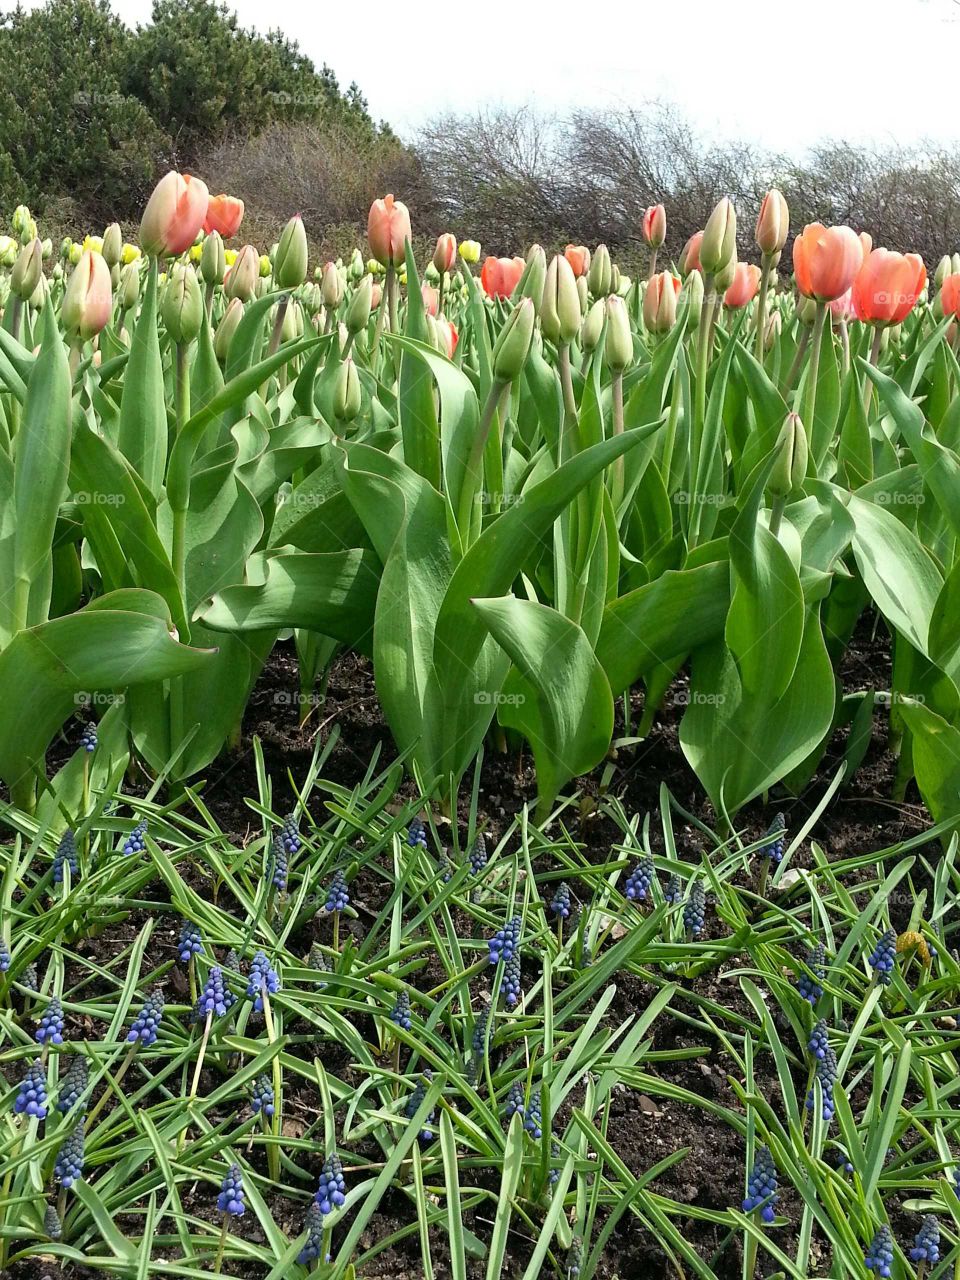 Several red tulips and other blue flowers